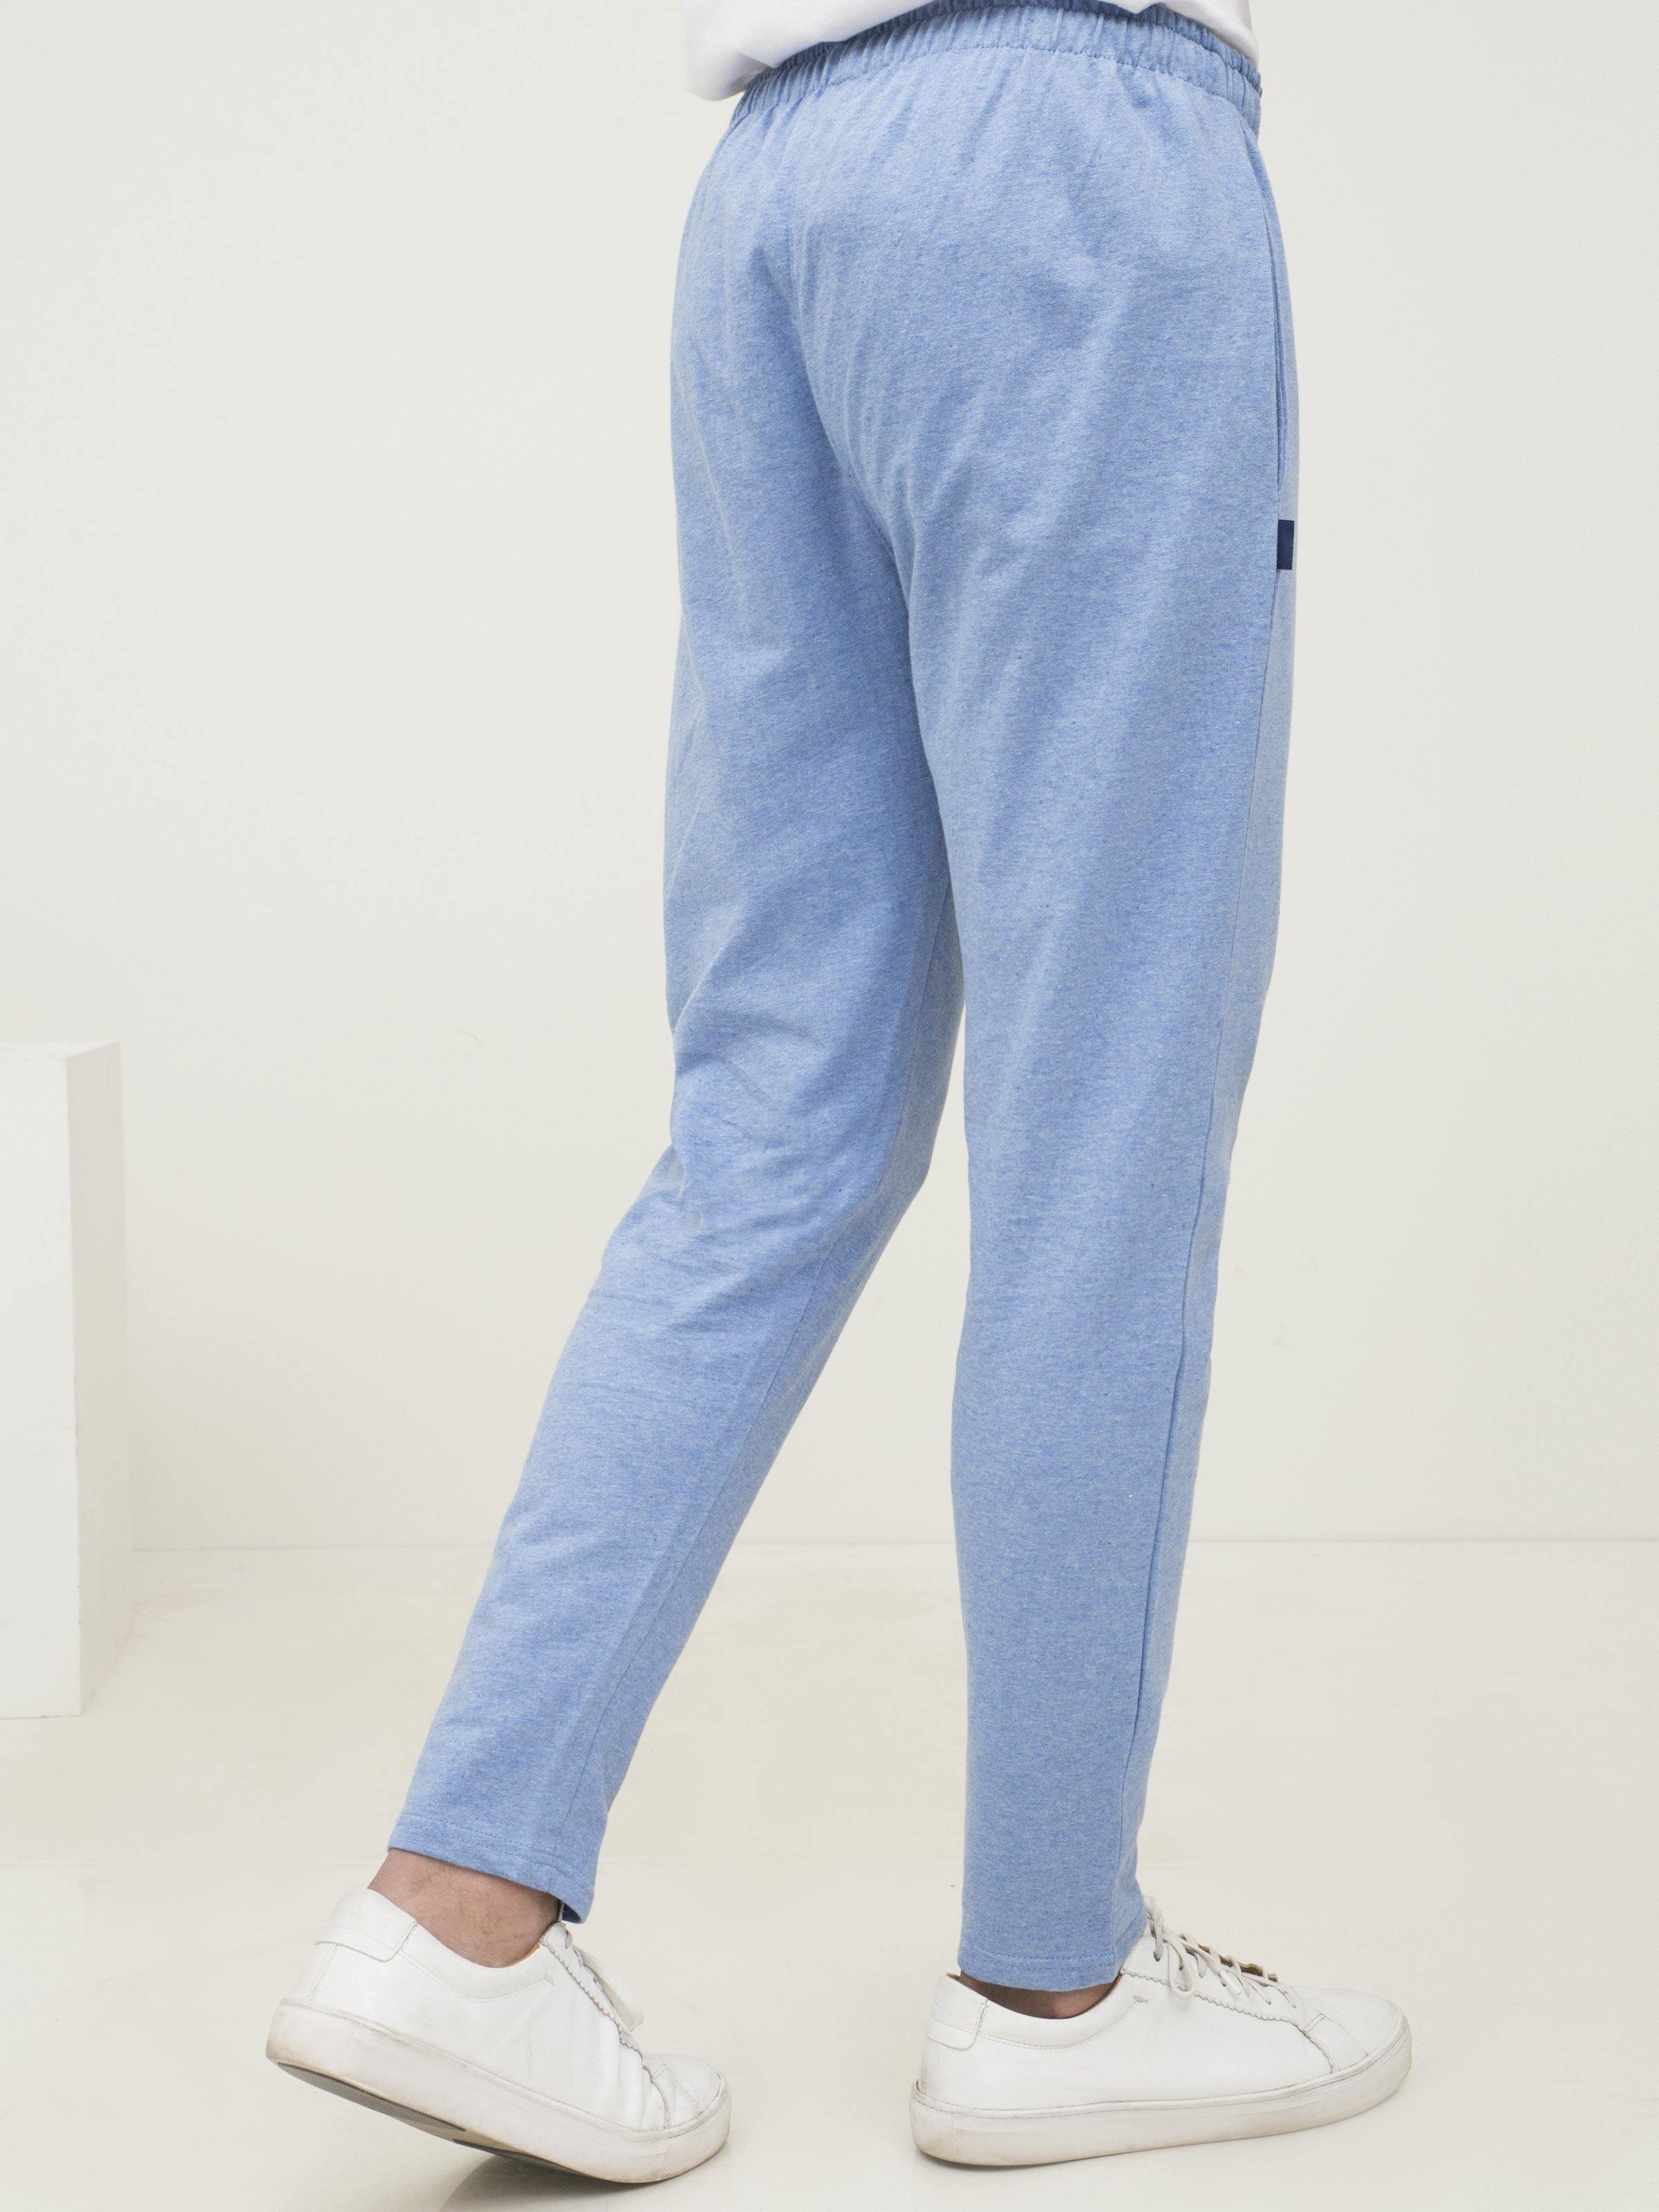 CASUAL TROUSER KNITE SLEEPWEAR SEA BLUE at Charcoal Clothing